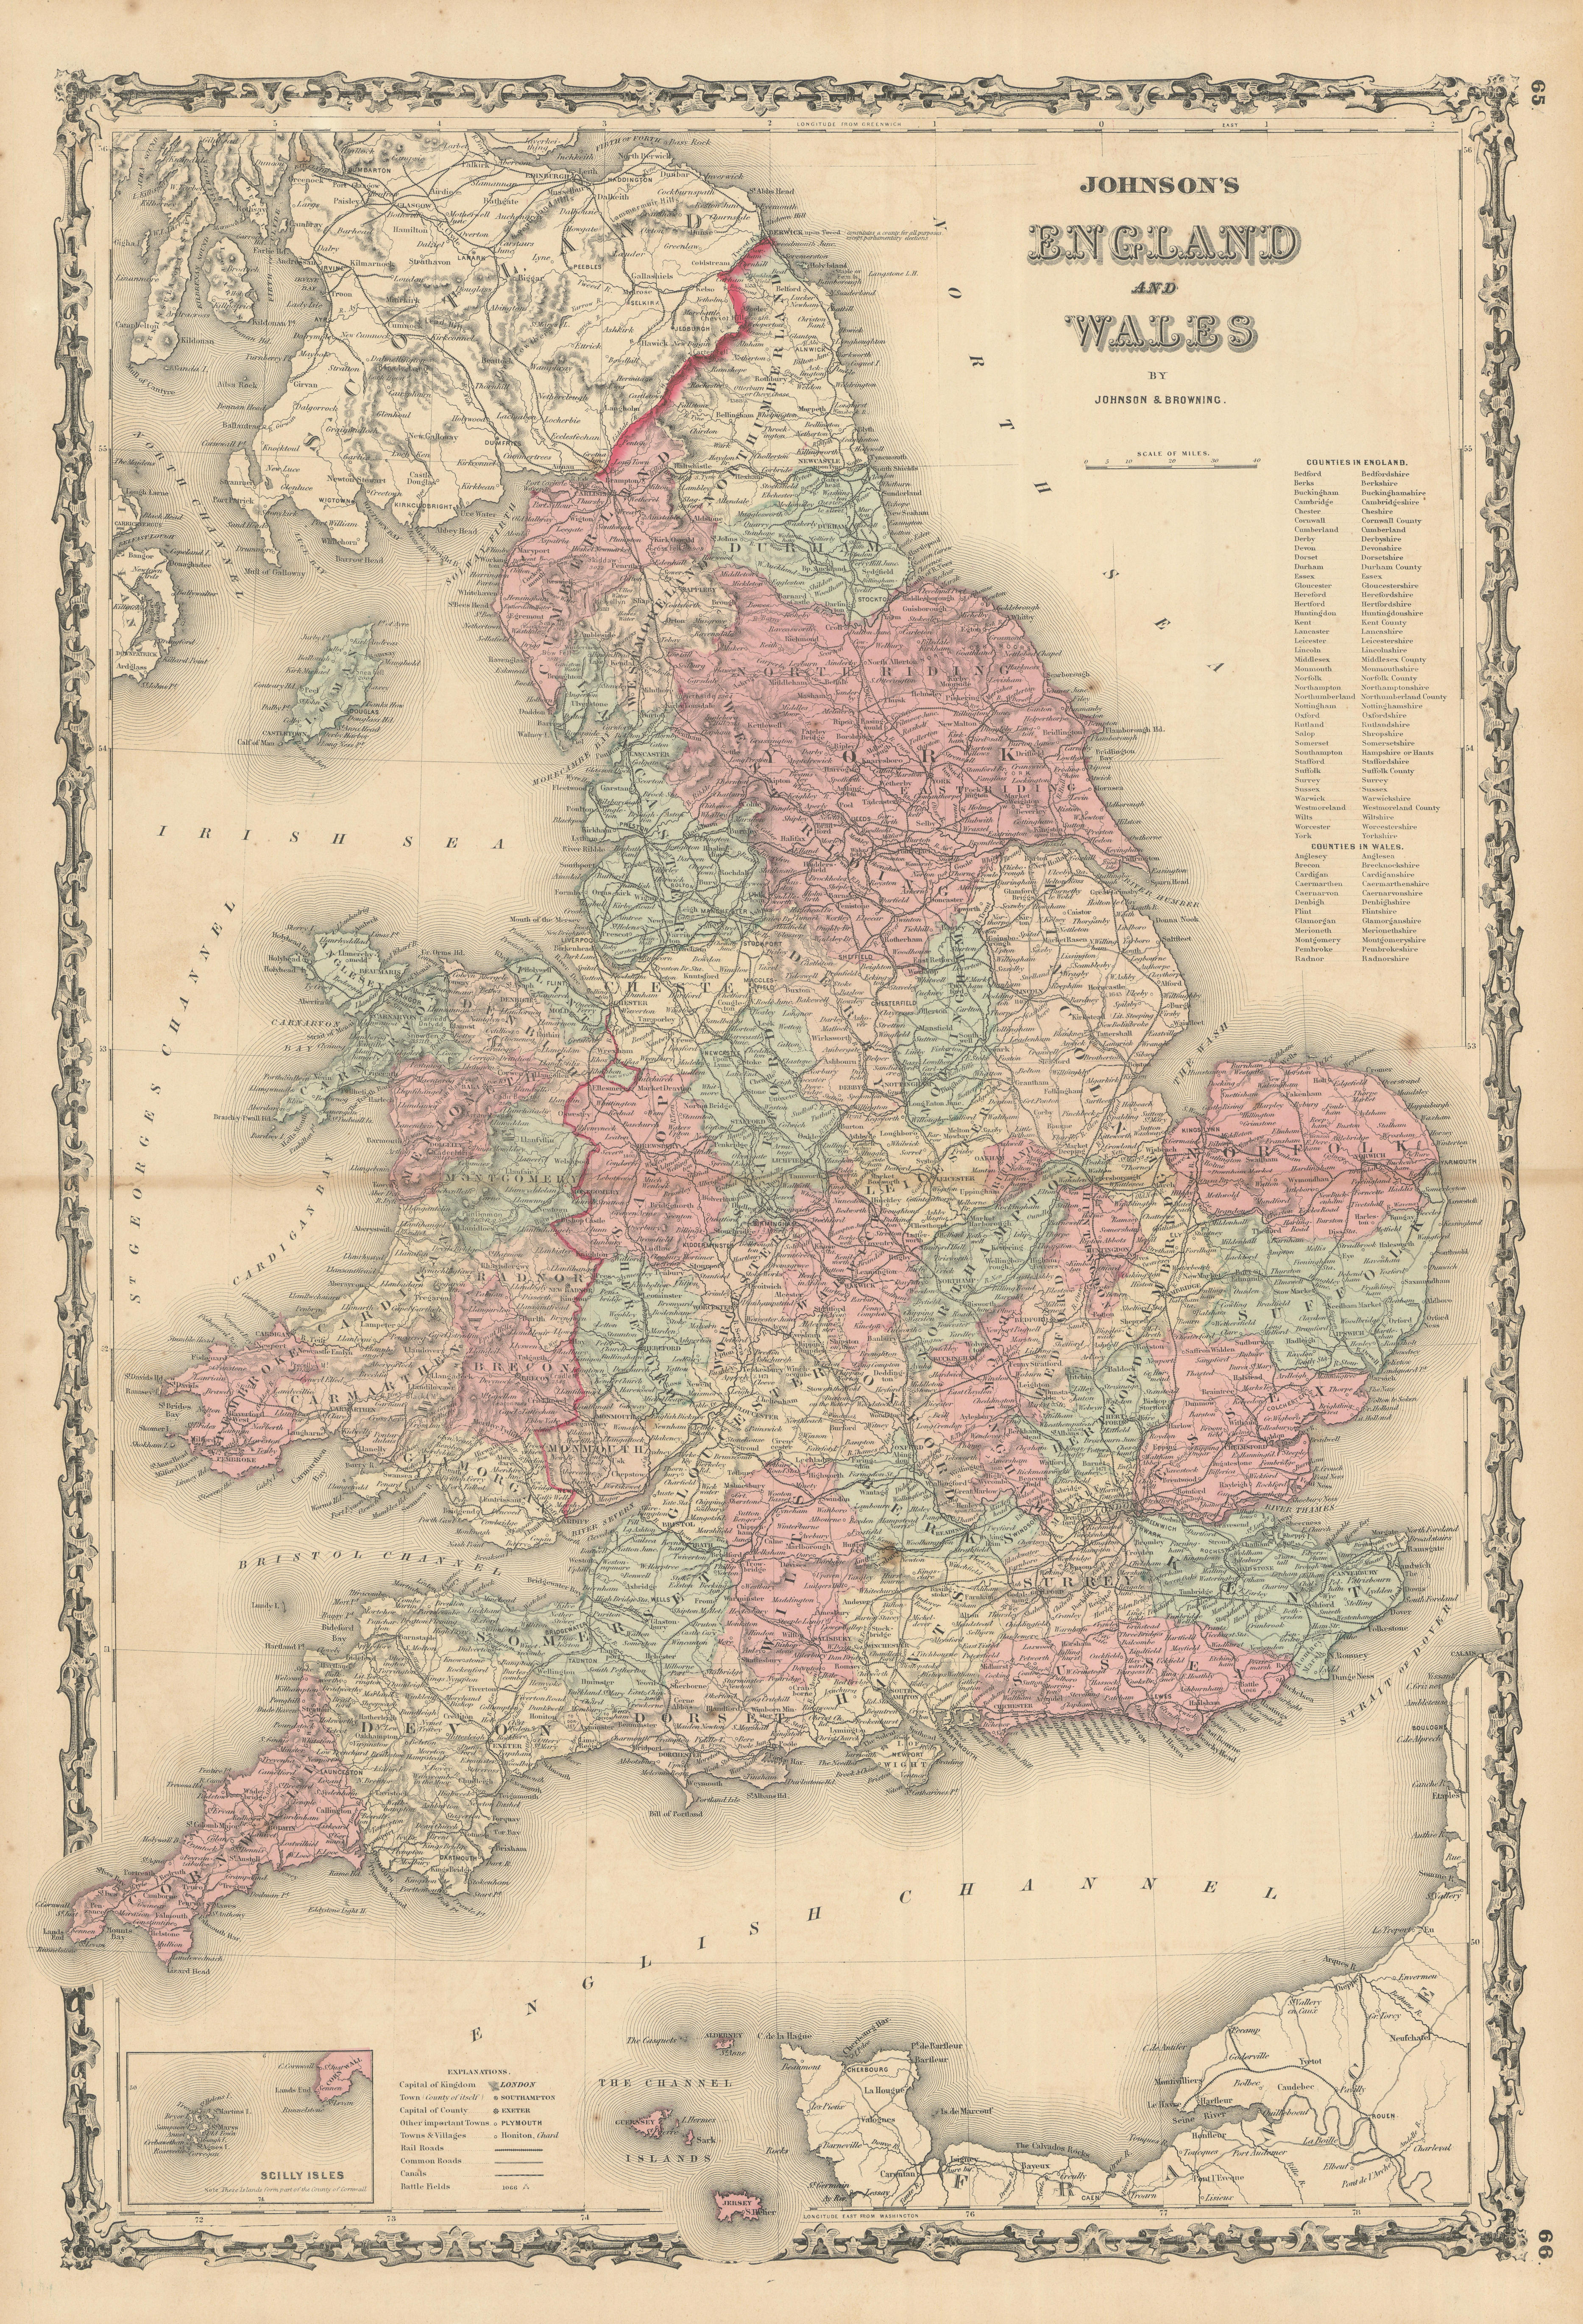 Associate Product Johnson's England and Wales in counties. Railways 1861 old antique map chart